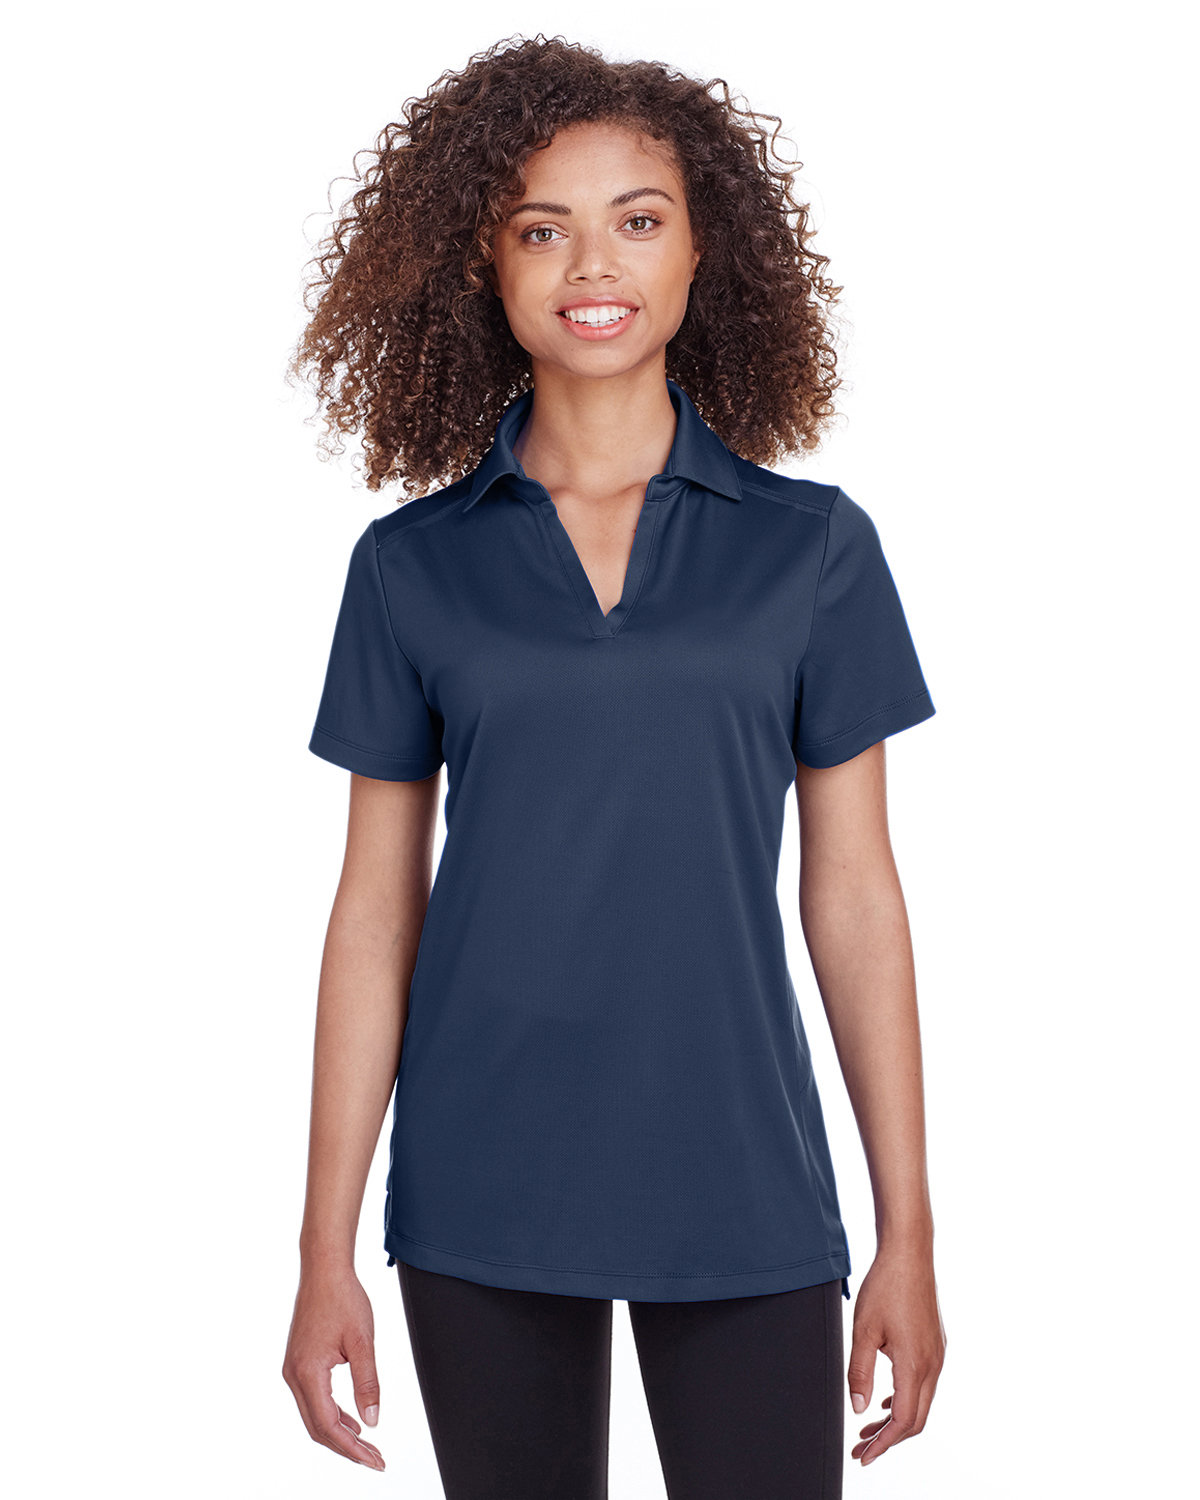 Spyder Ladies' Freestyle Polo FRONTIER 